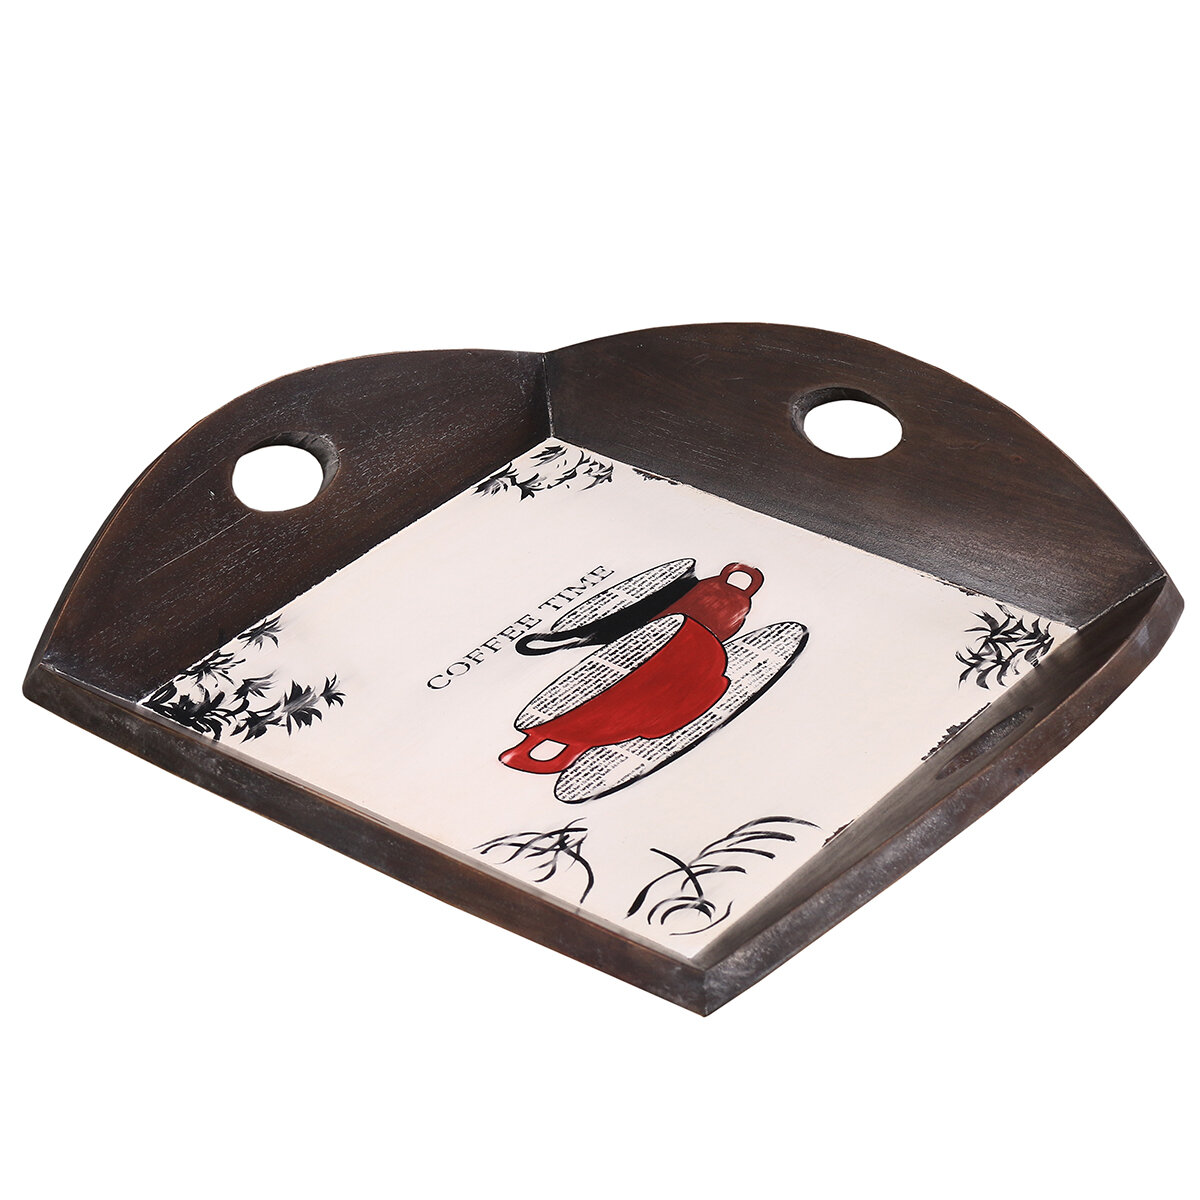 Homestead Coffee Time Small 4 Handle Serving Tray (DISPLAY ONLY)